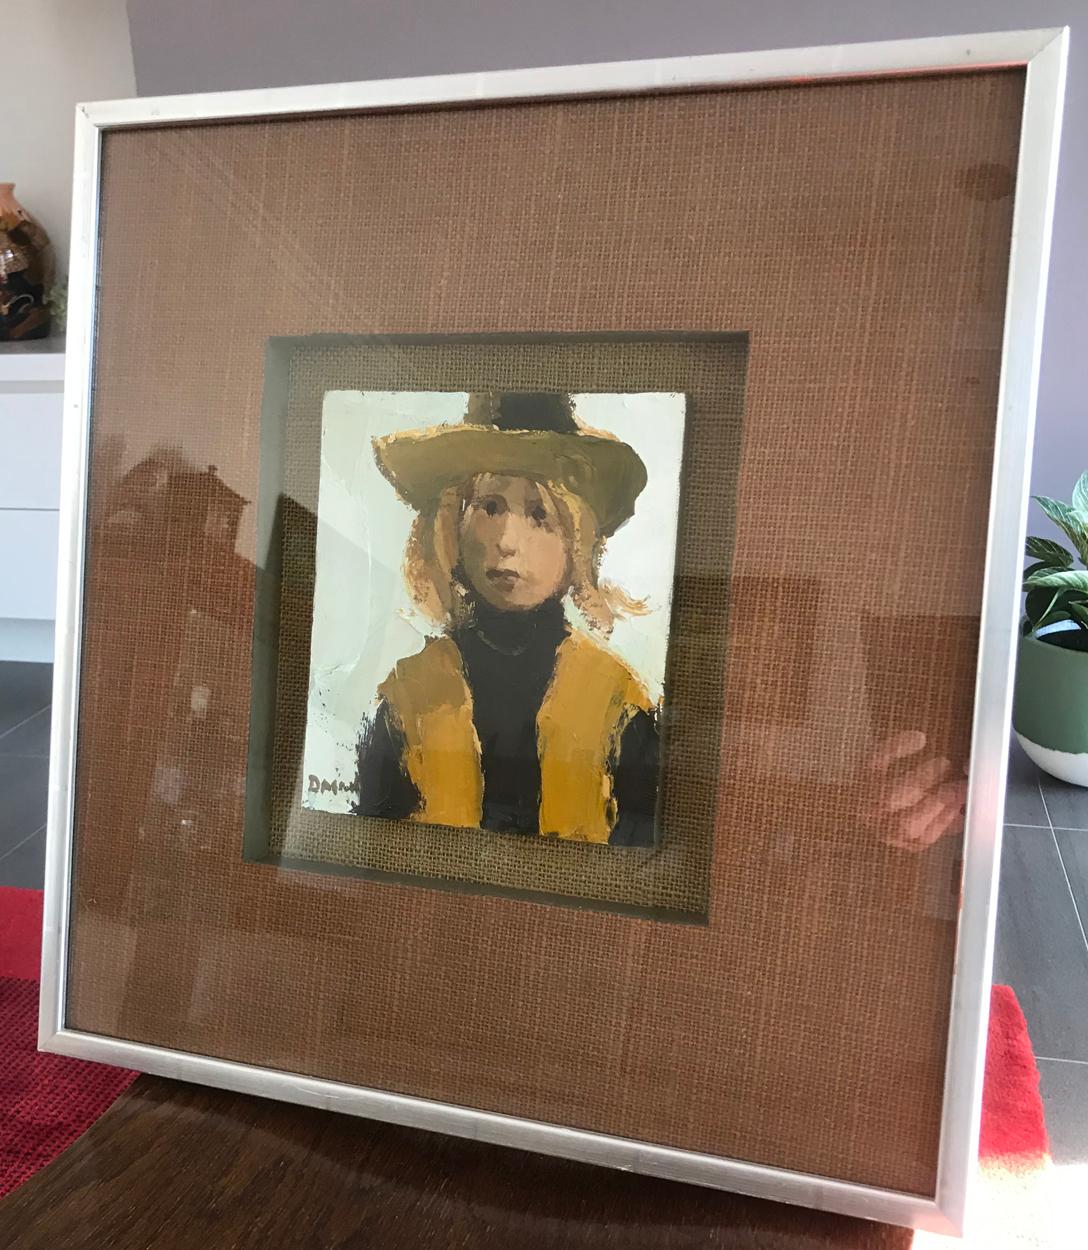 A relatively rare portrait painting, oil on board of a young woman, titled Bridie's Hat. Thackeray Gallery, Kensington, London label on the back and inscribed with the artist's name and title of the work.

Donald McIntyre was born in 1923 in